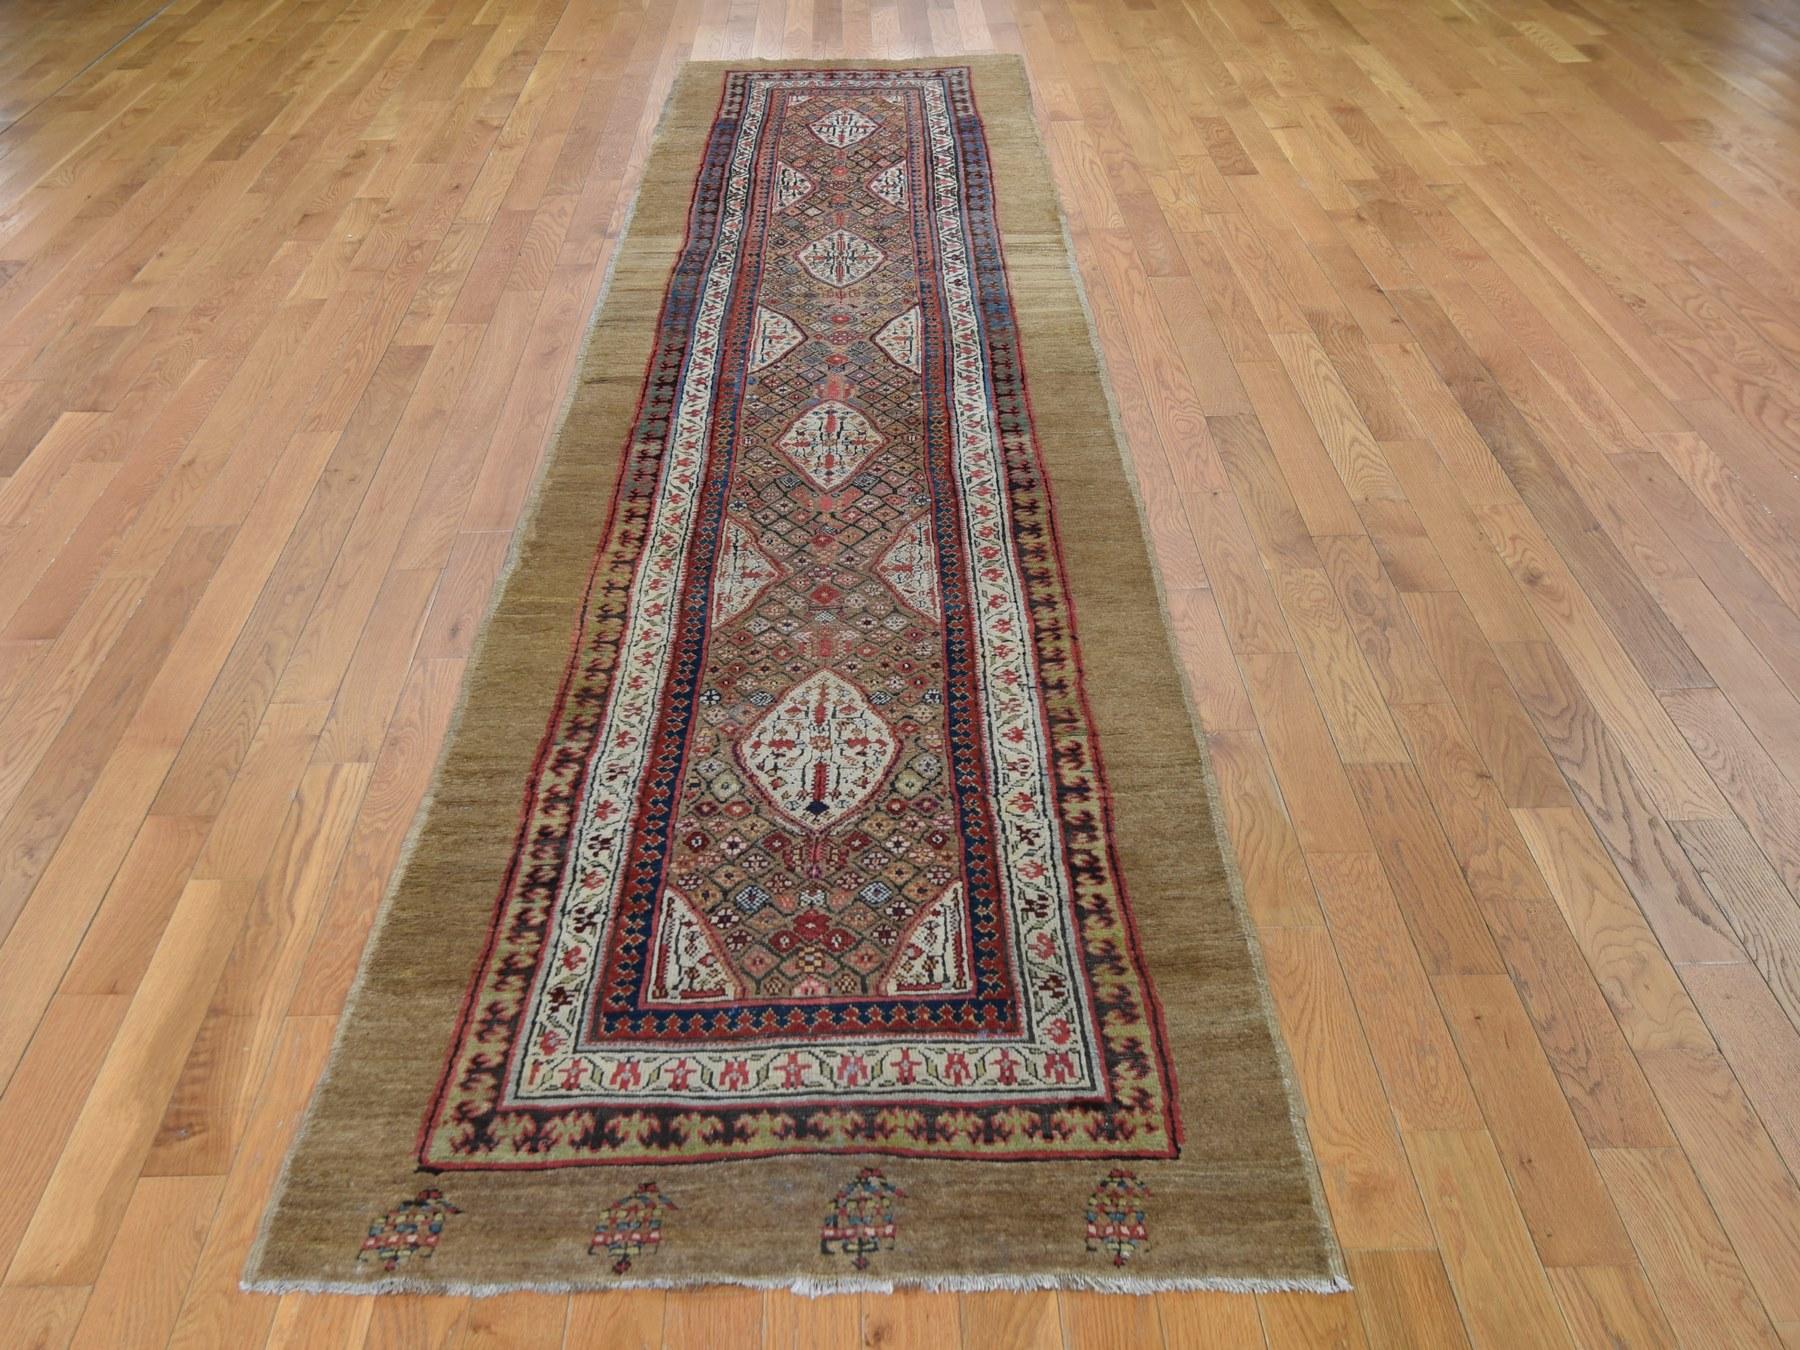 This is a truly genuine one of a kind brown antique Persian Serab Runner camel hair full pile Runner rug. It has been knotted for months and months in the centuries-old Persian weaving craftsmanship techniques by expert artisans.

Primary materials: